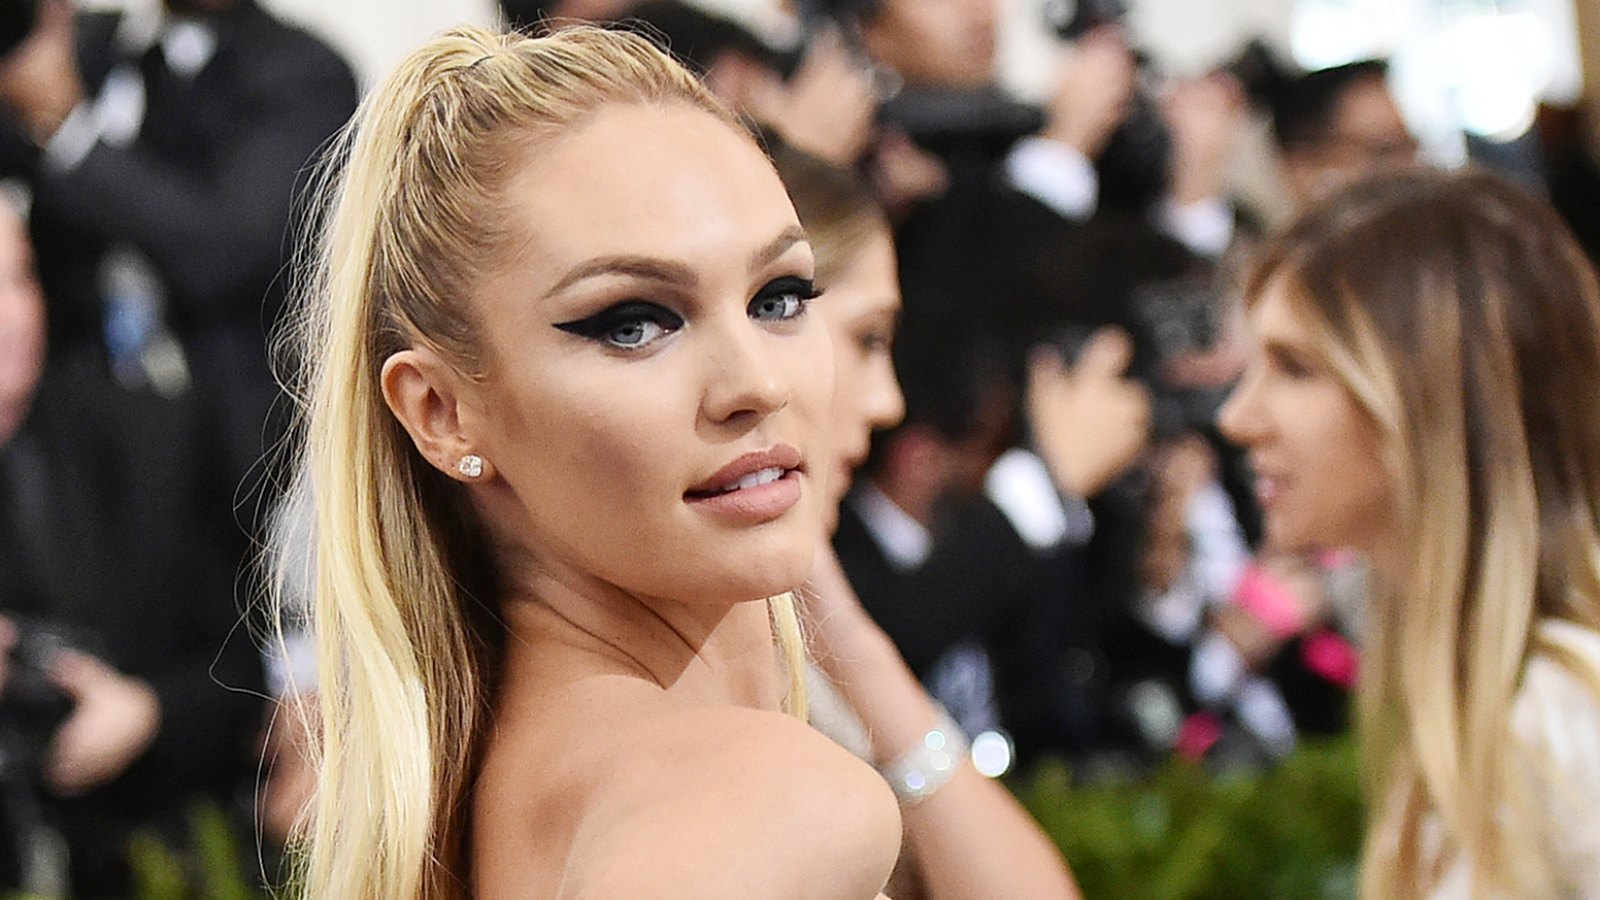 Candice Swanepoel Fires Back at Body-Shamers